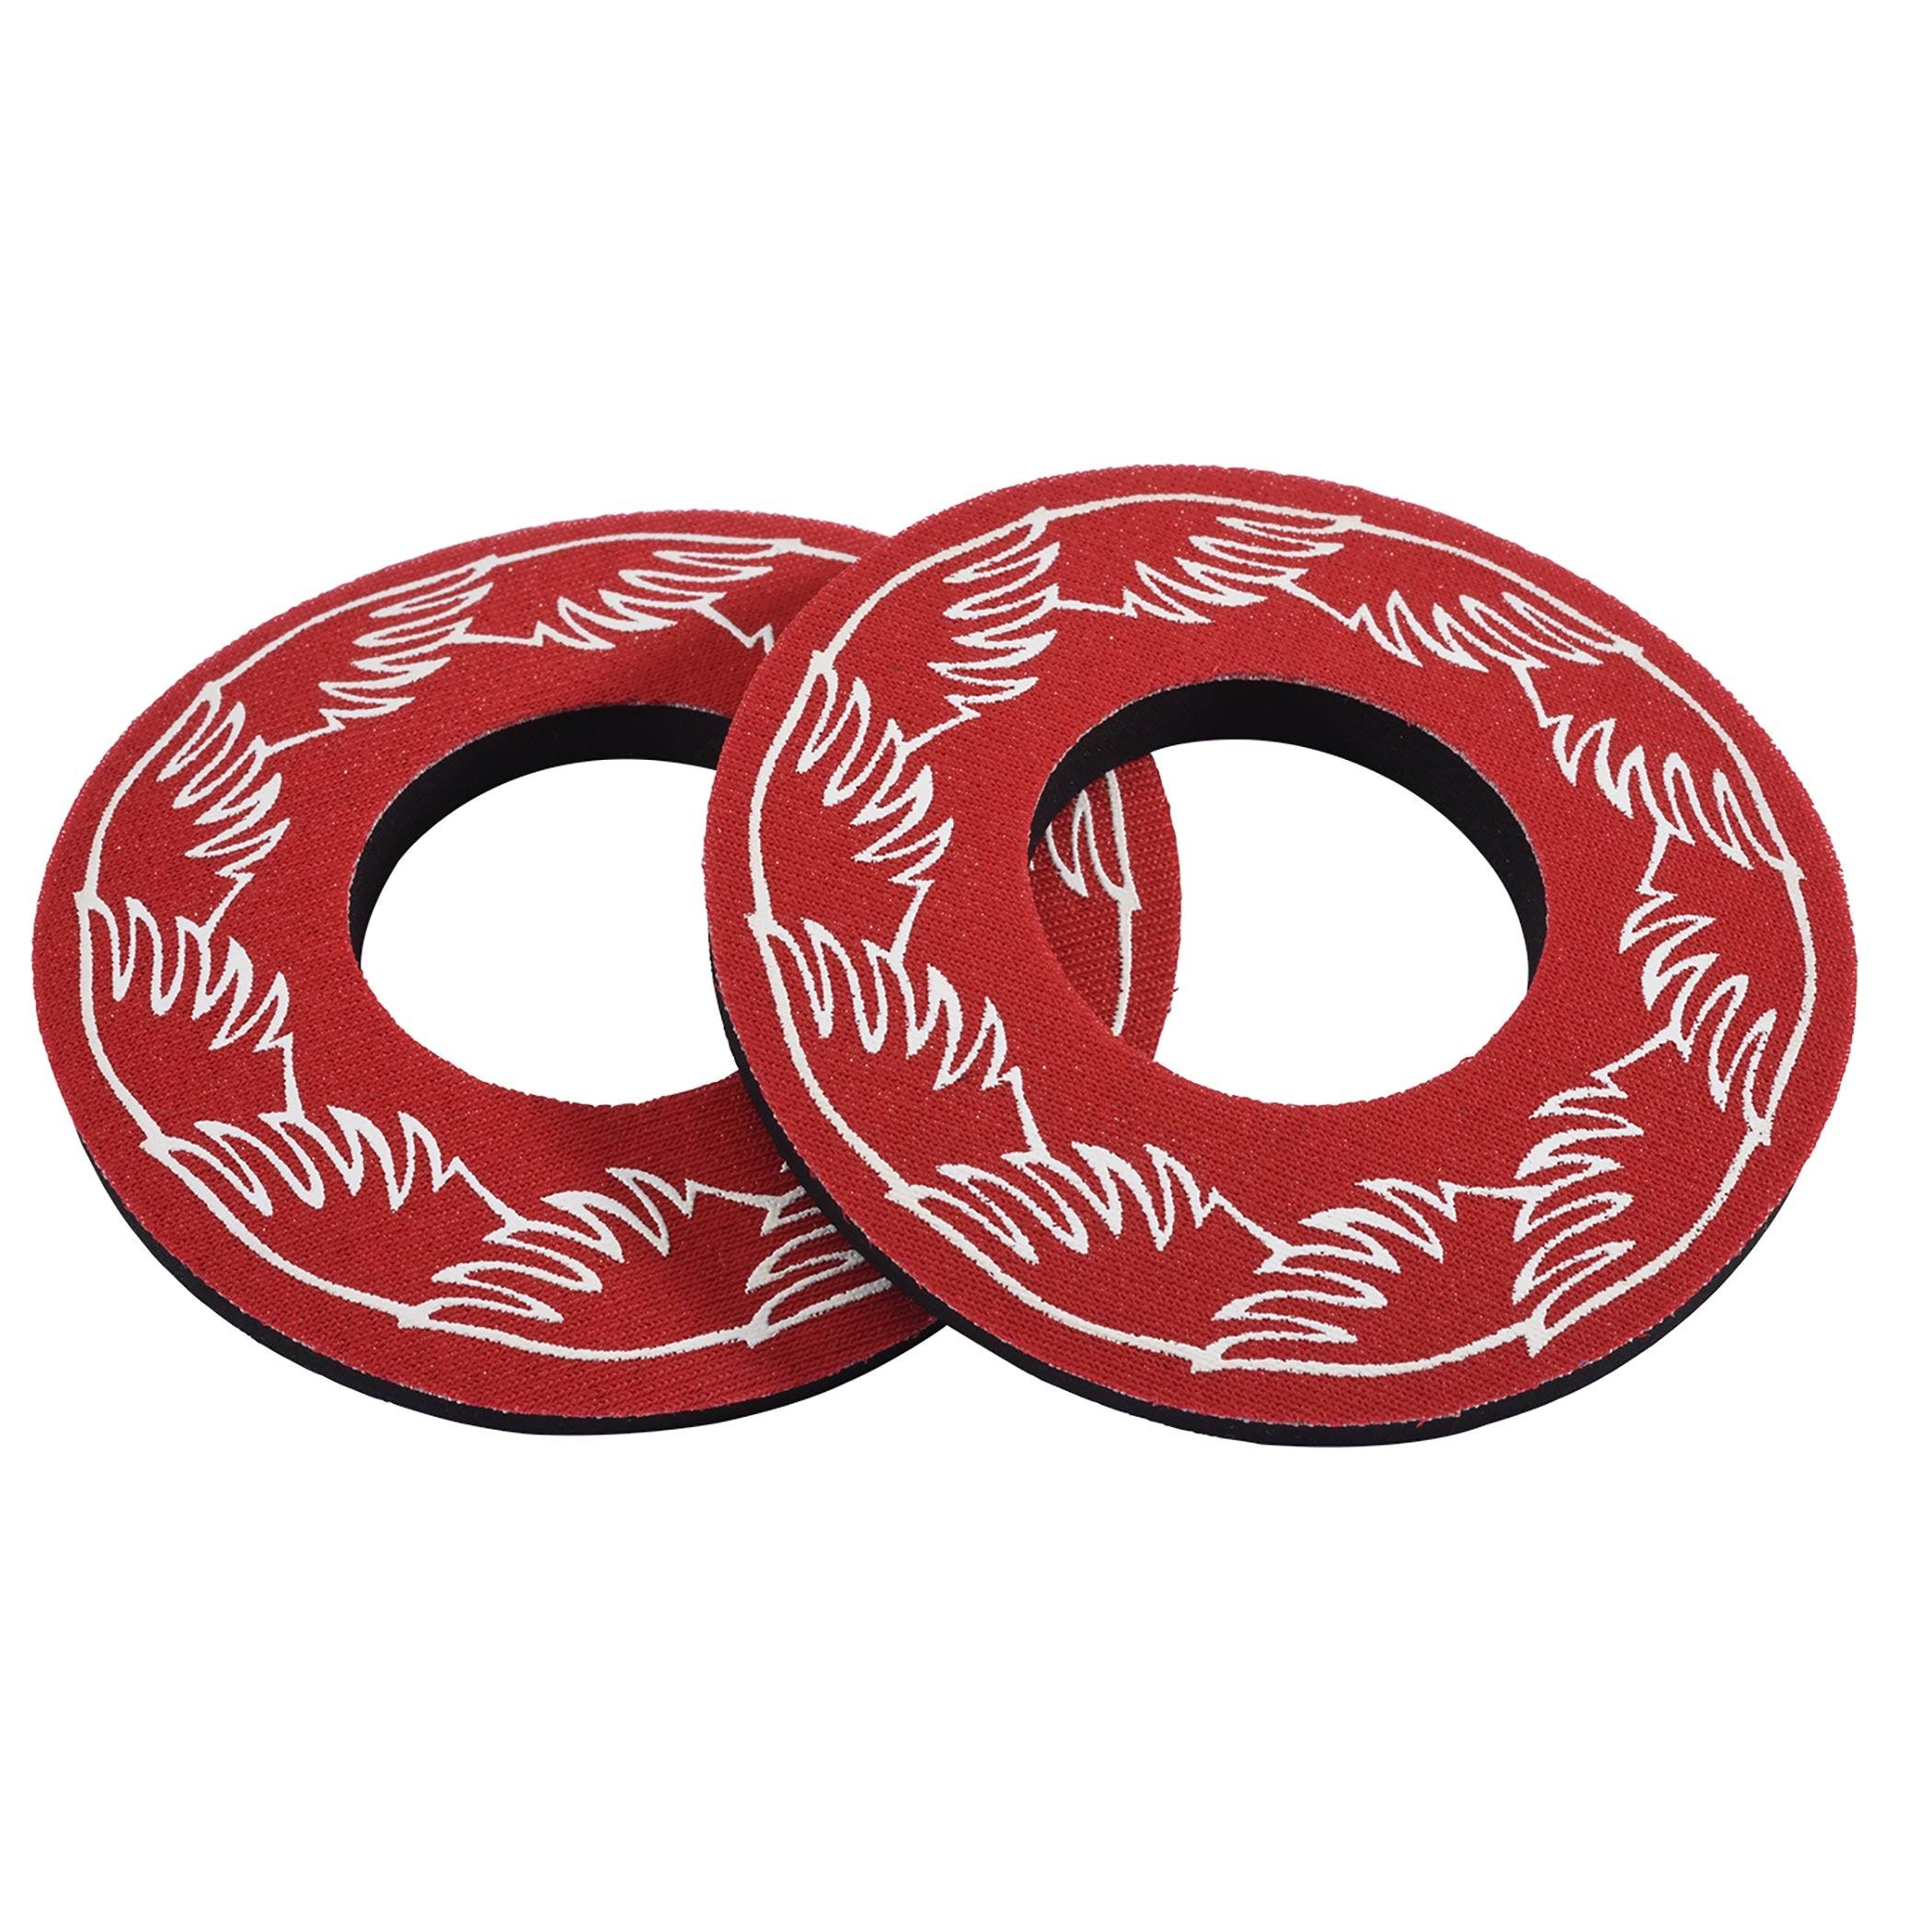 Se Racing Wing BMX Grip Donuts - Red, Pair